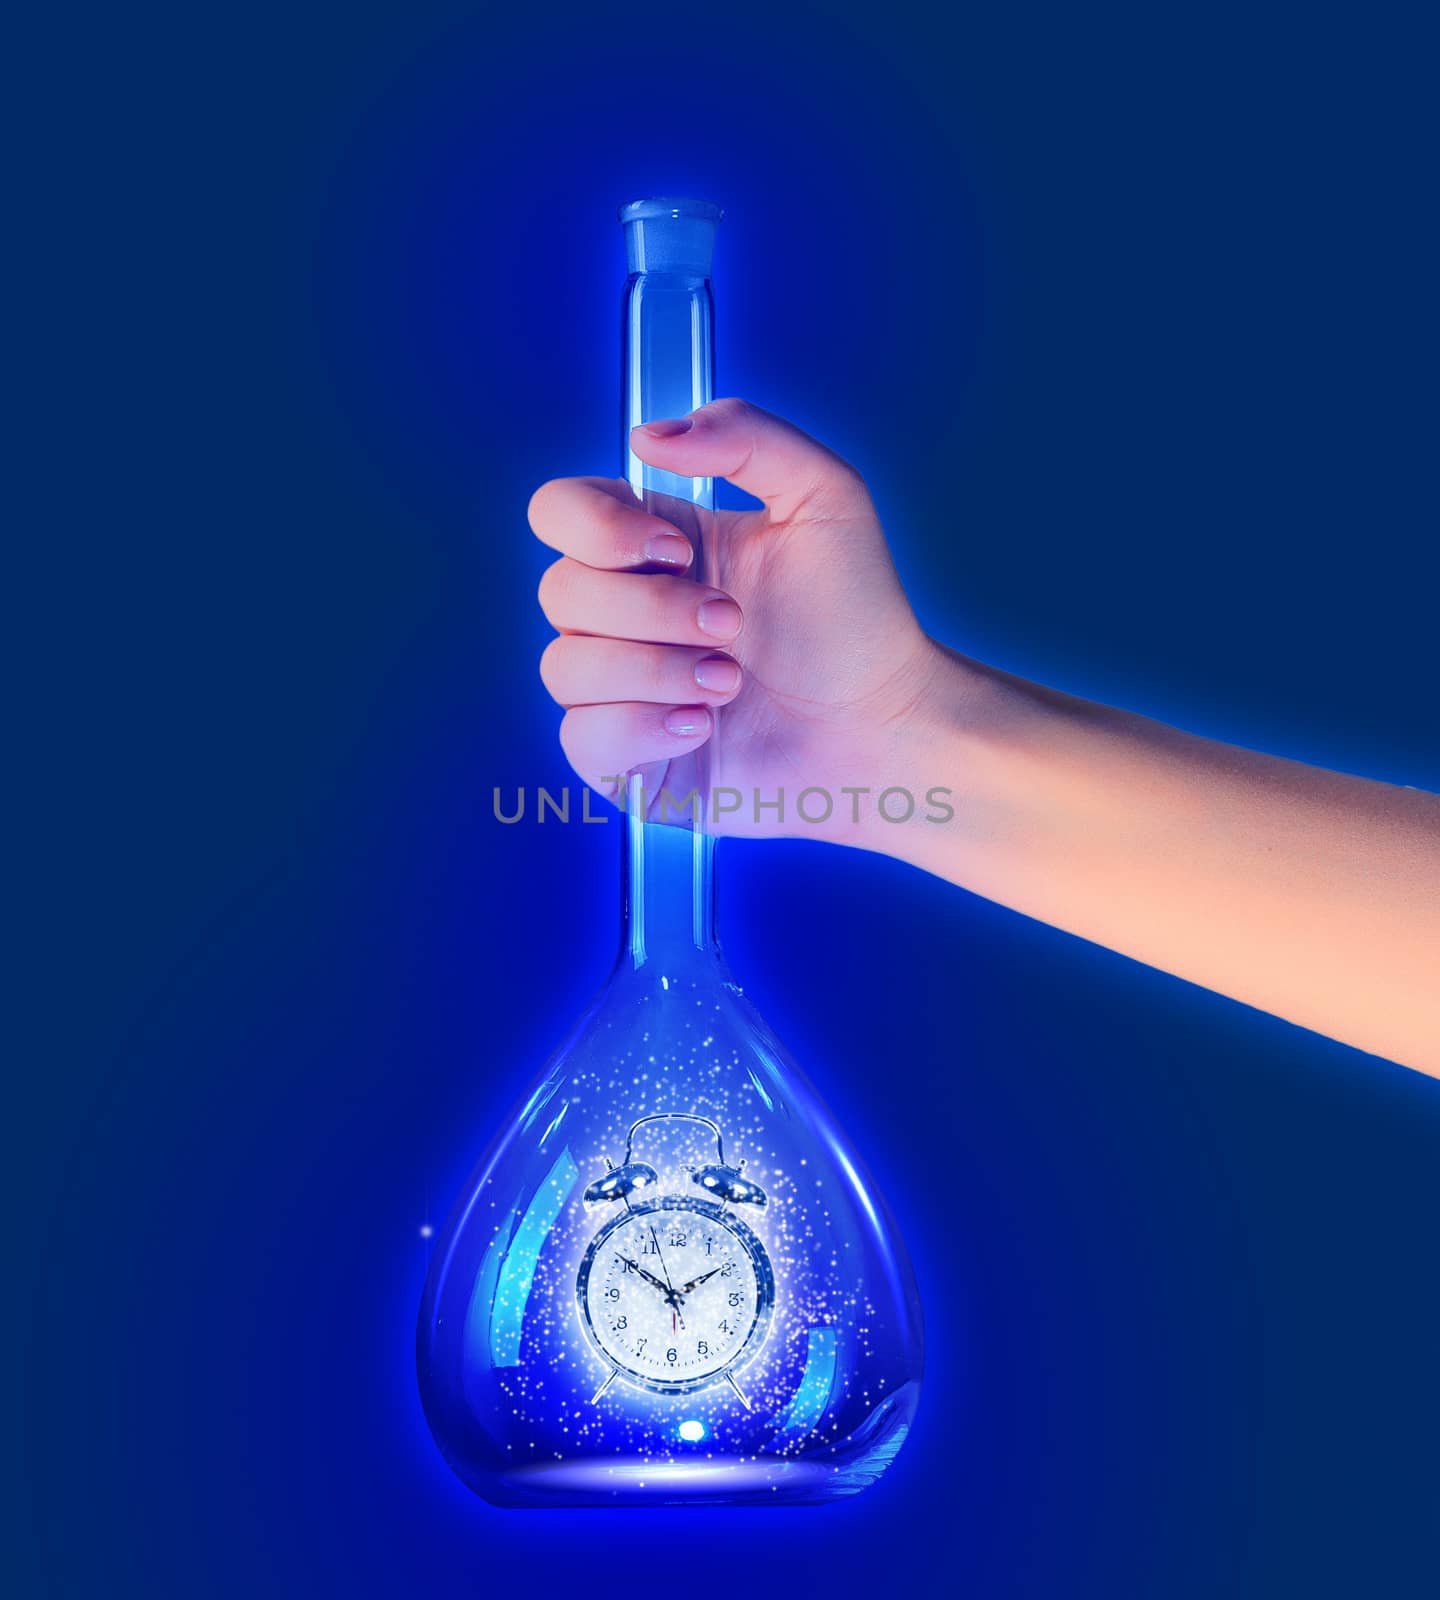 Human hand holding test tube with alarm clock inside